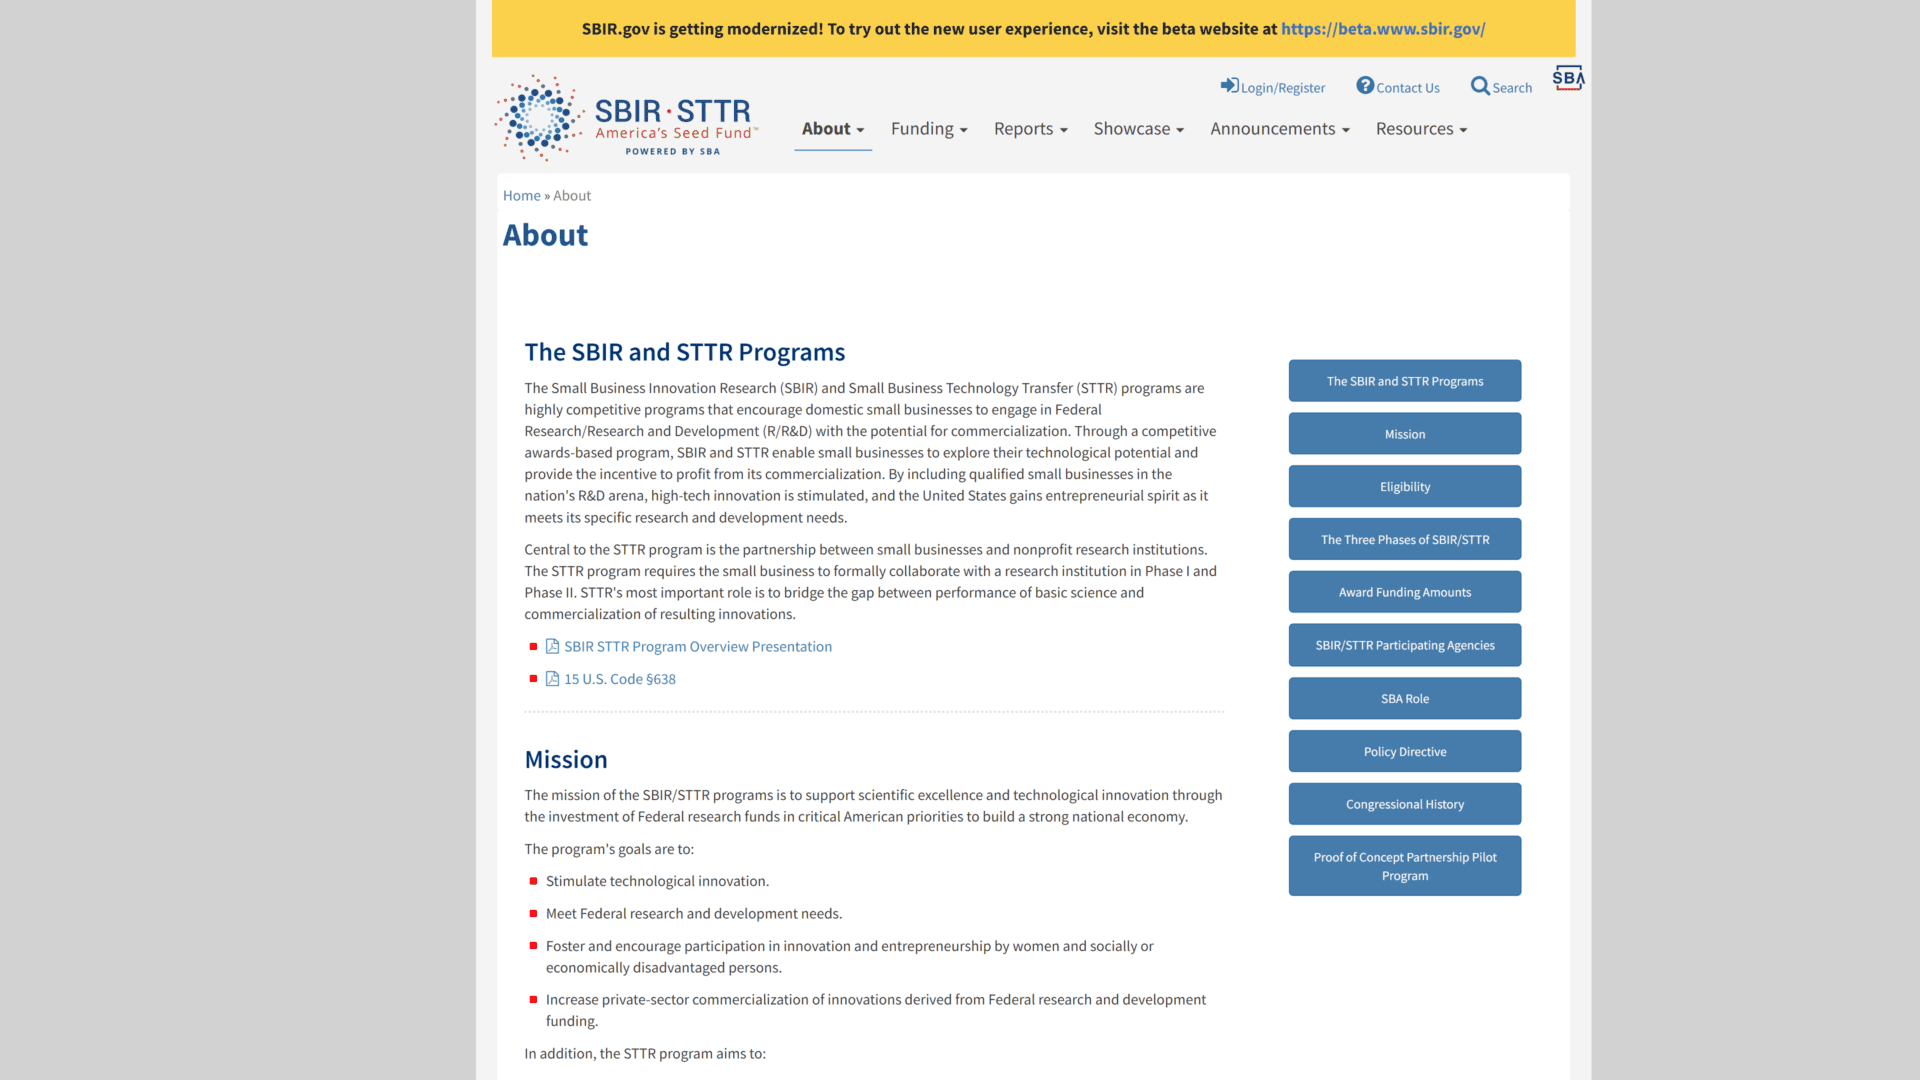 screenshot of the SBIR and STTR homepage